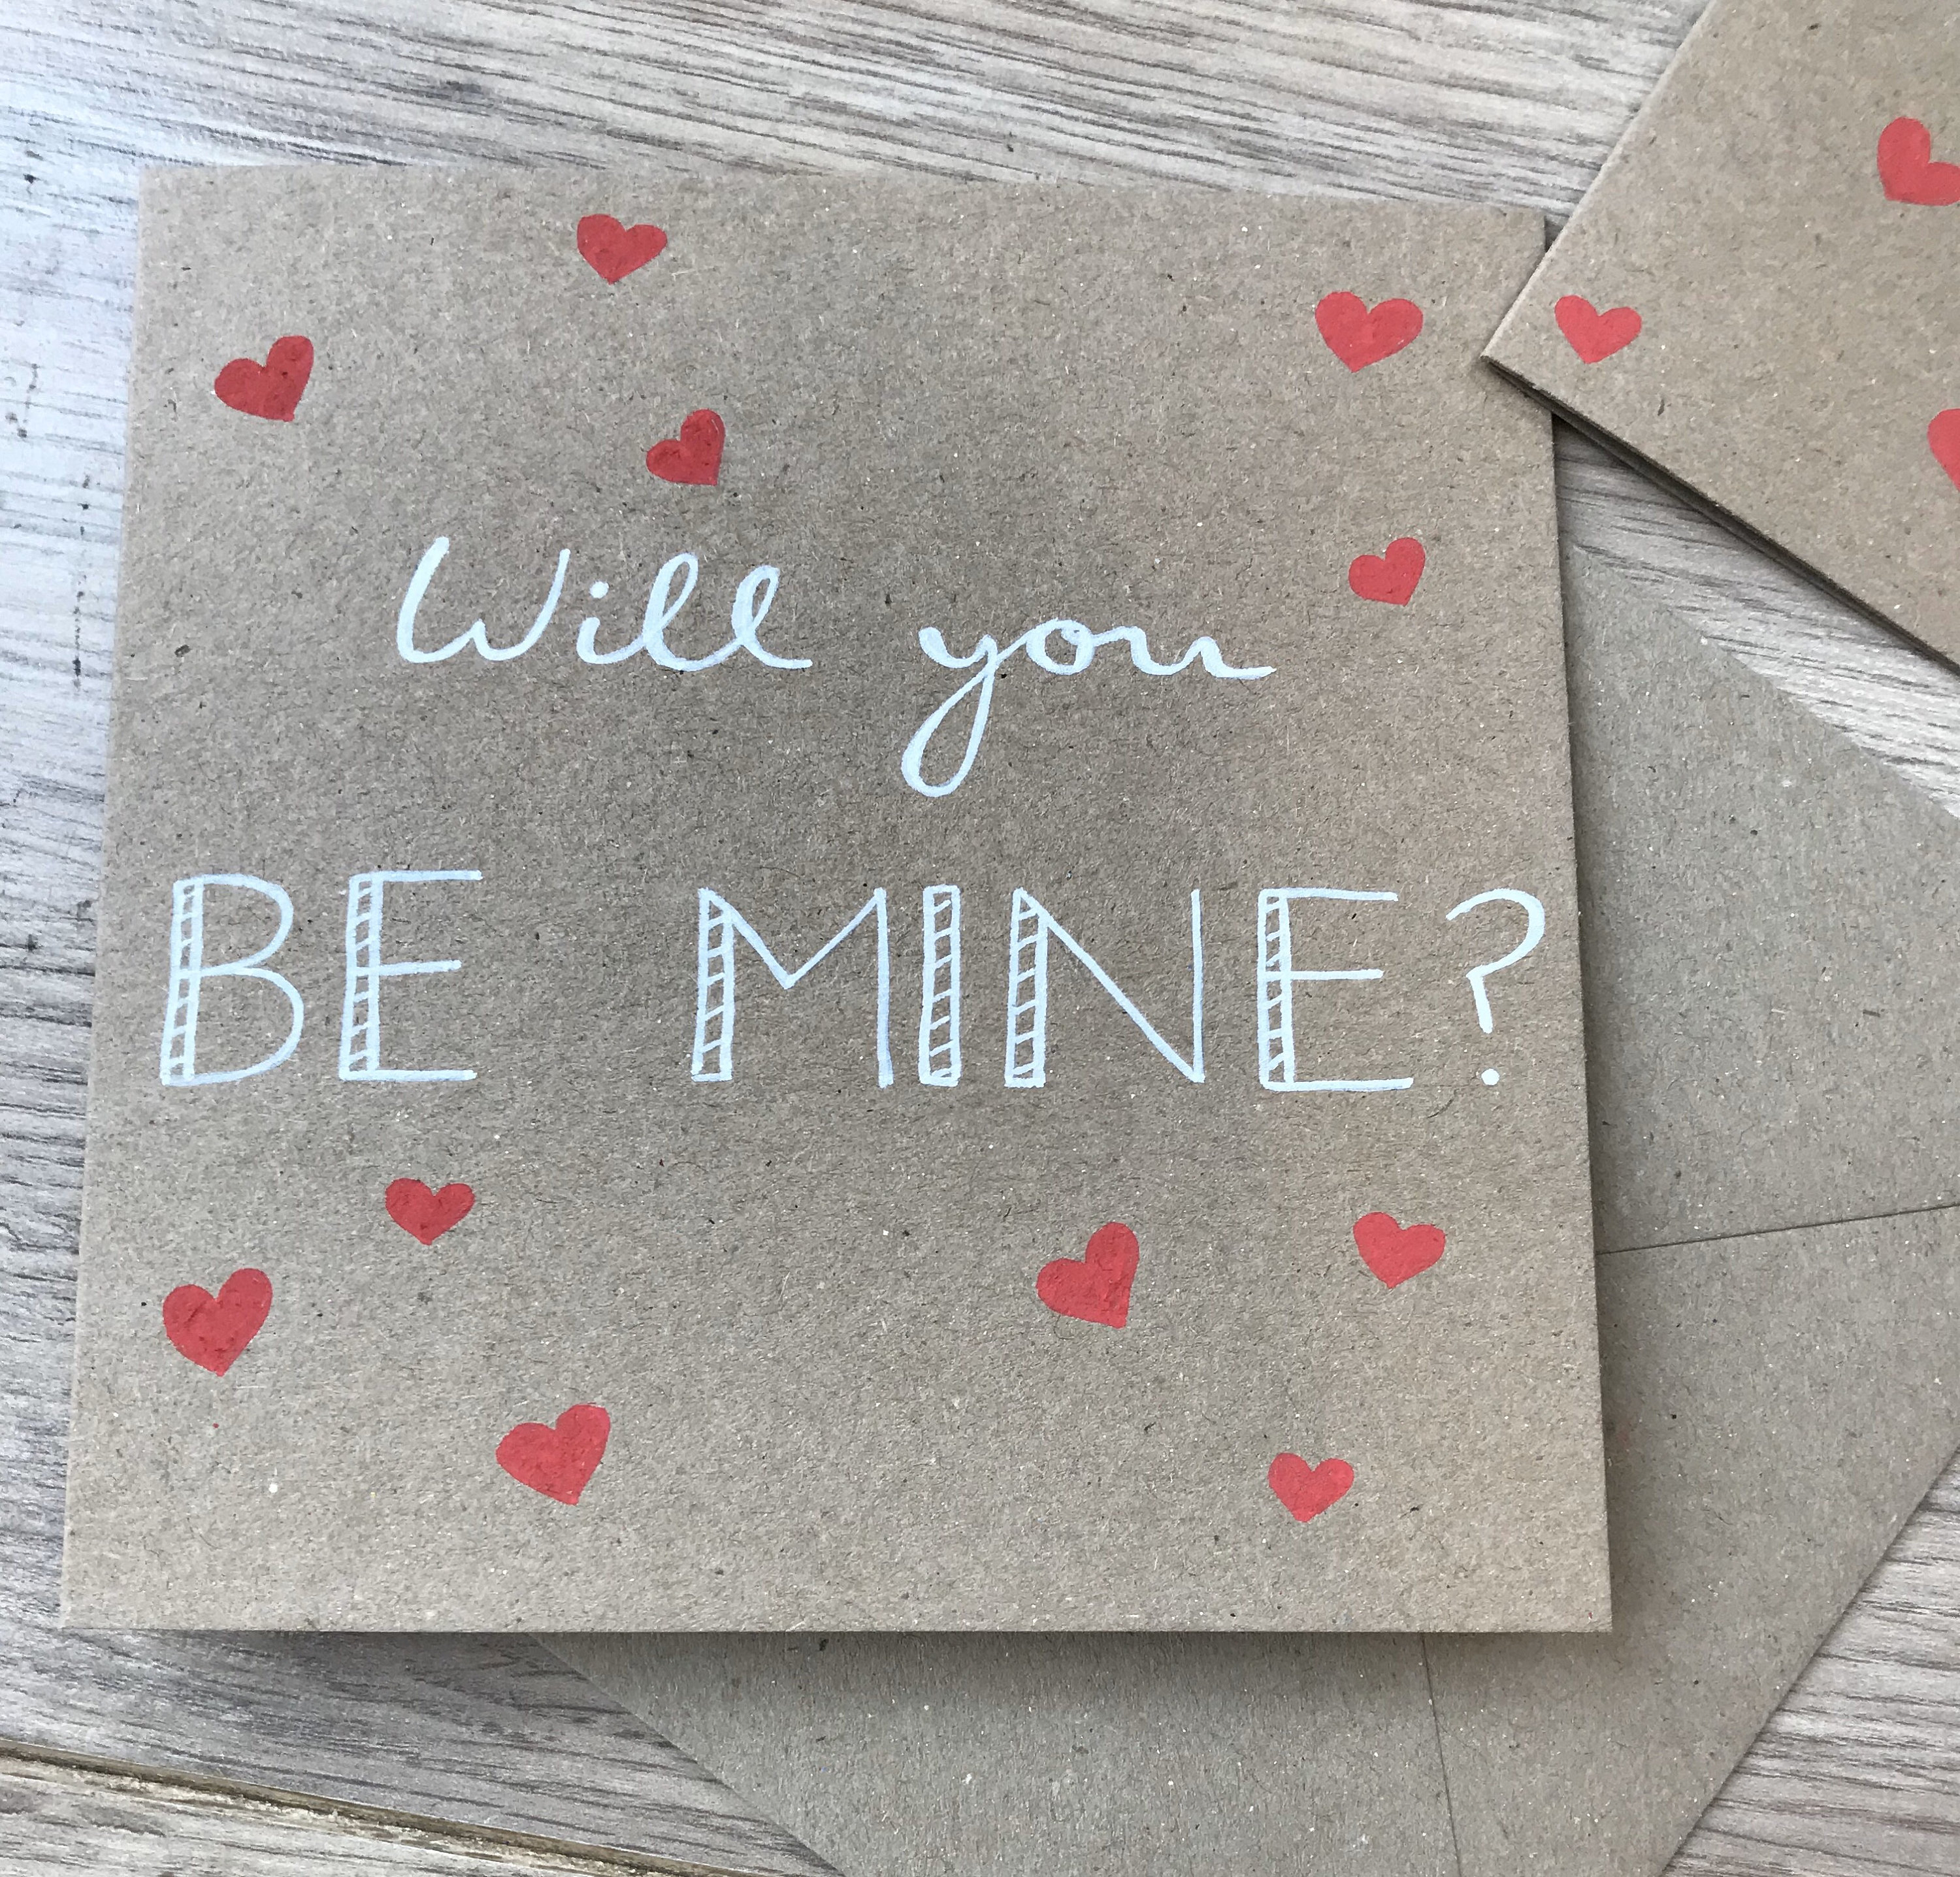 You, Be mine!